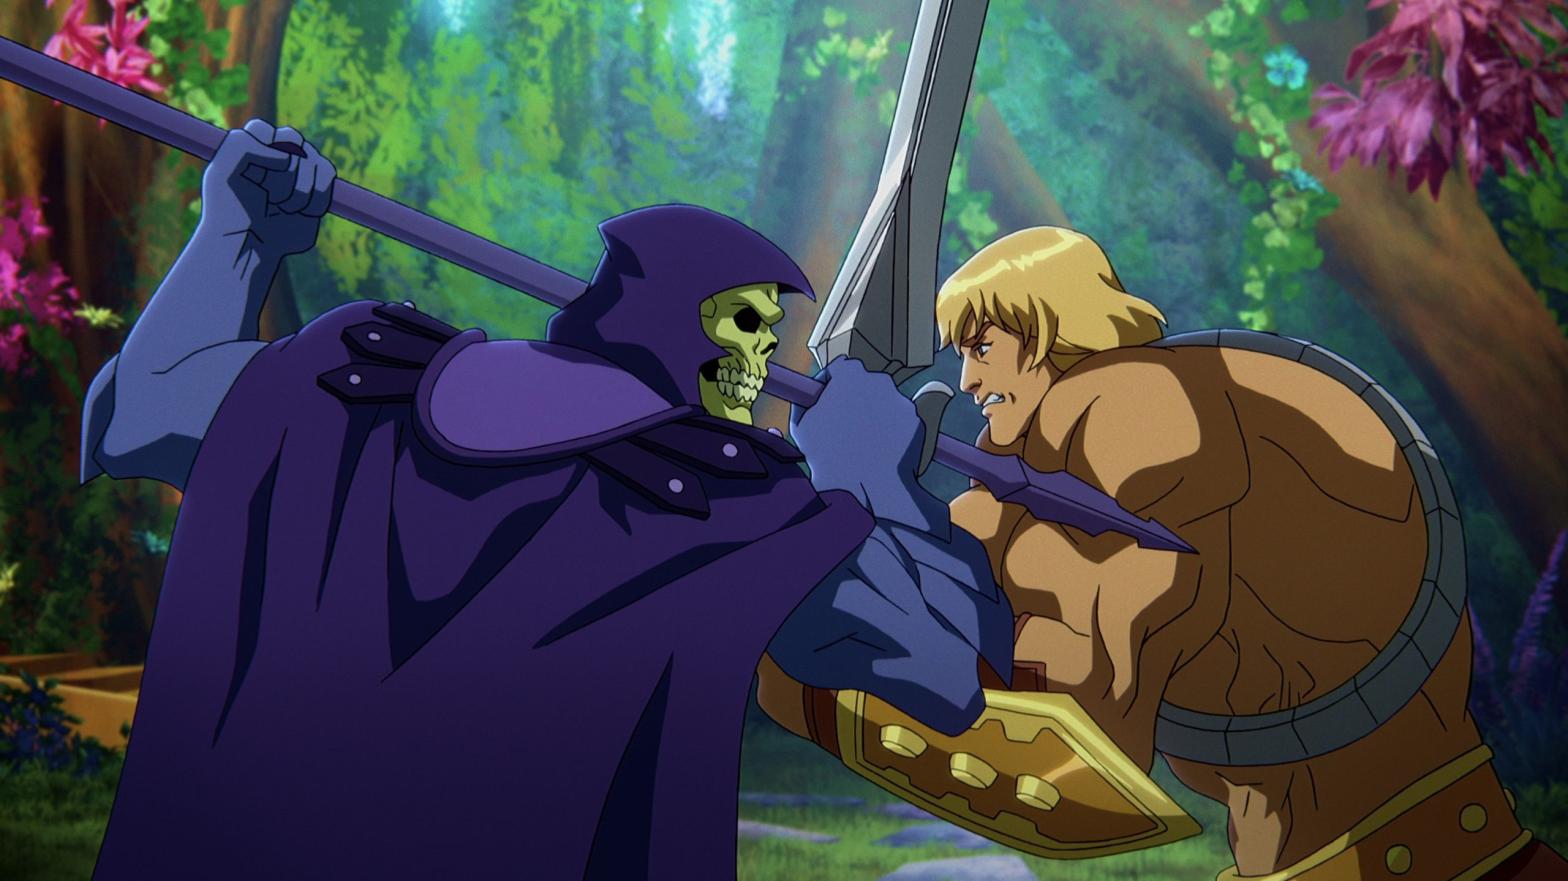 Skeletor and He-Man are ready to clash again. (Image: Netflix)